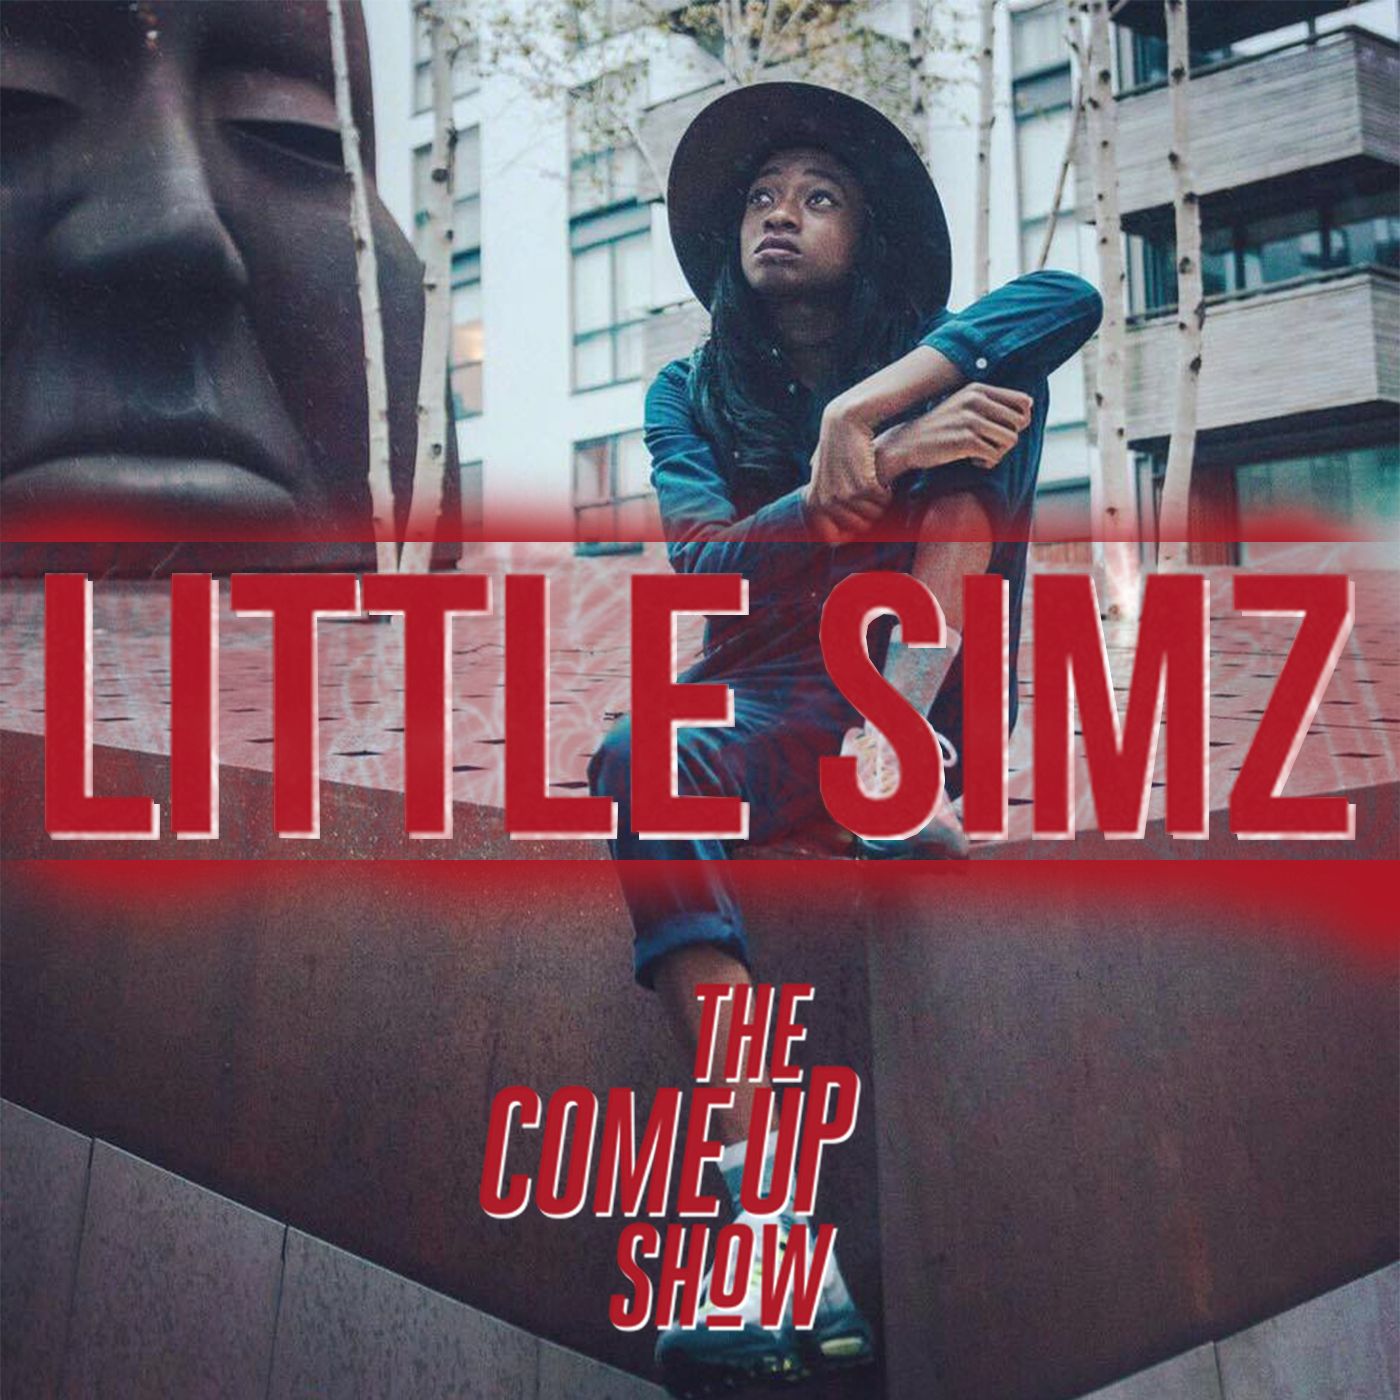 Thumbnail for "Little Simz: Do What You Love & Love What You Do".